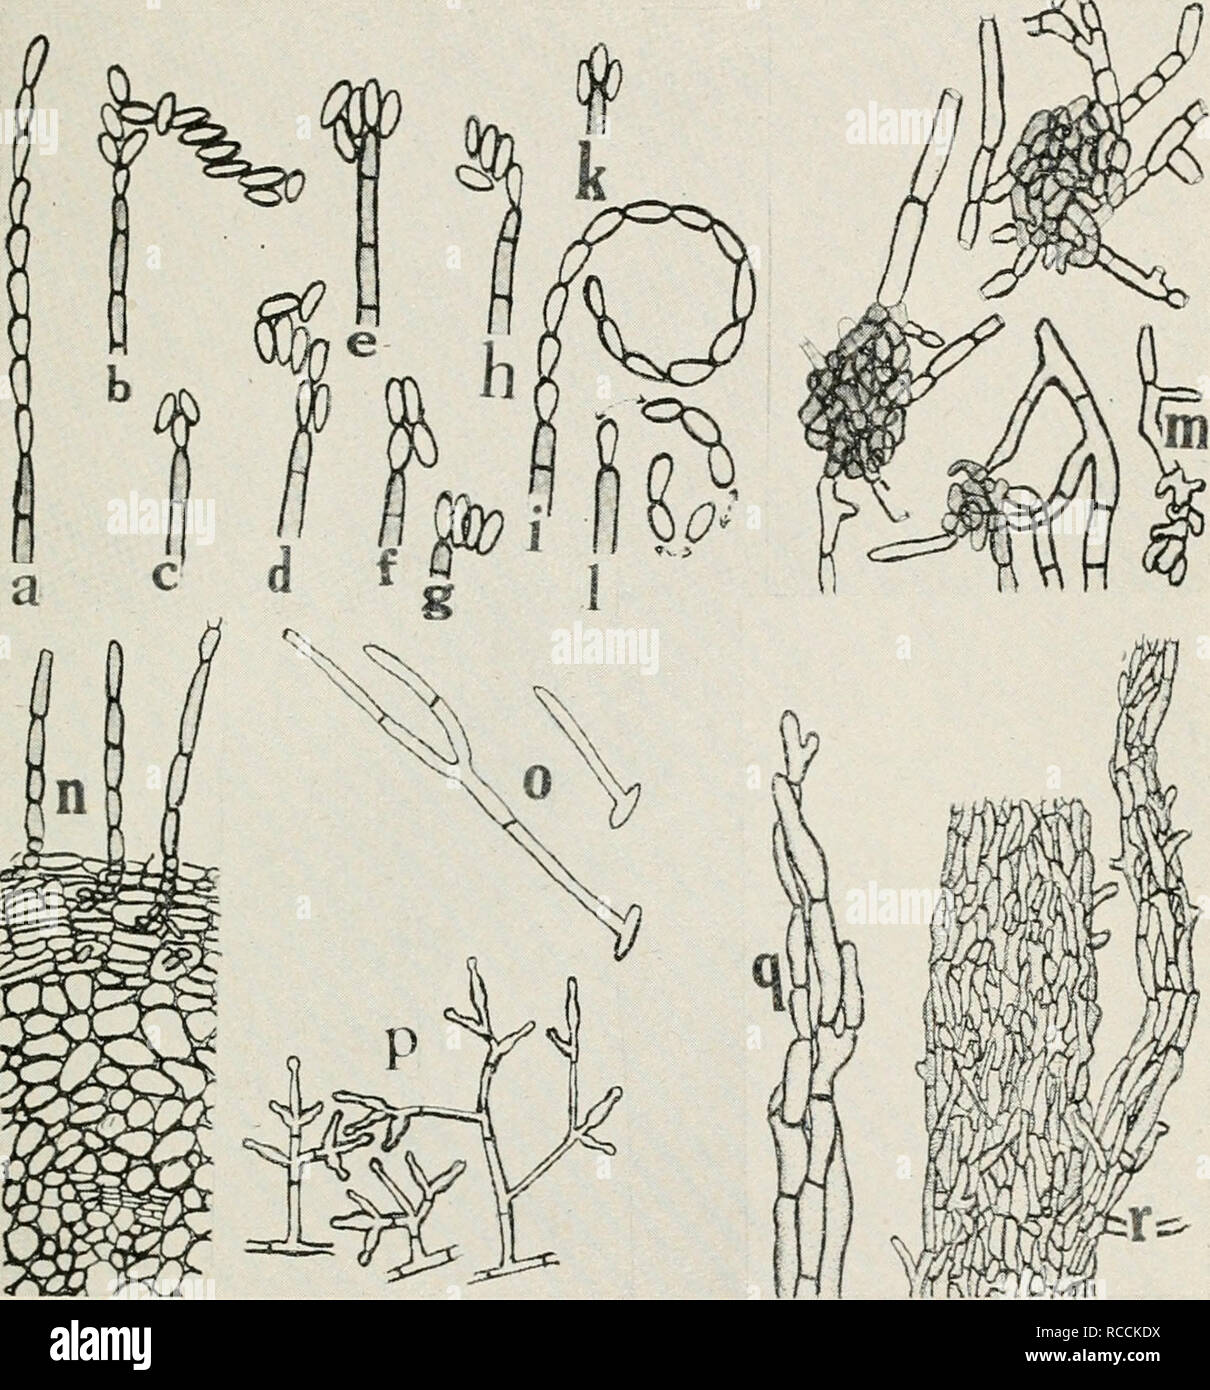 . Diseases of truck crops and their control. Plants -- Diseases. Fig. 28. Sweet Potato Diseases. a. and /. Chains of conidia of the soil stain fungus MonilochcEtes infuscans, b. to /. manner in which the chains of conidia of M. infuscans are breaking up into individual spores, o. germinating conidia of M. infuscans, n. part of a cross section of a sweet potato root showing the relationship of M. infuscans to the epidermis of the host, p. conidiophores of Trichoderma Koningi, a, young strands of mycelium of Phymatolrichum omnivorum, r. mycelial strands of the Texas root rot fungus, Ozonium omni Stock Photo